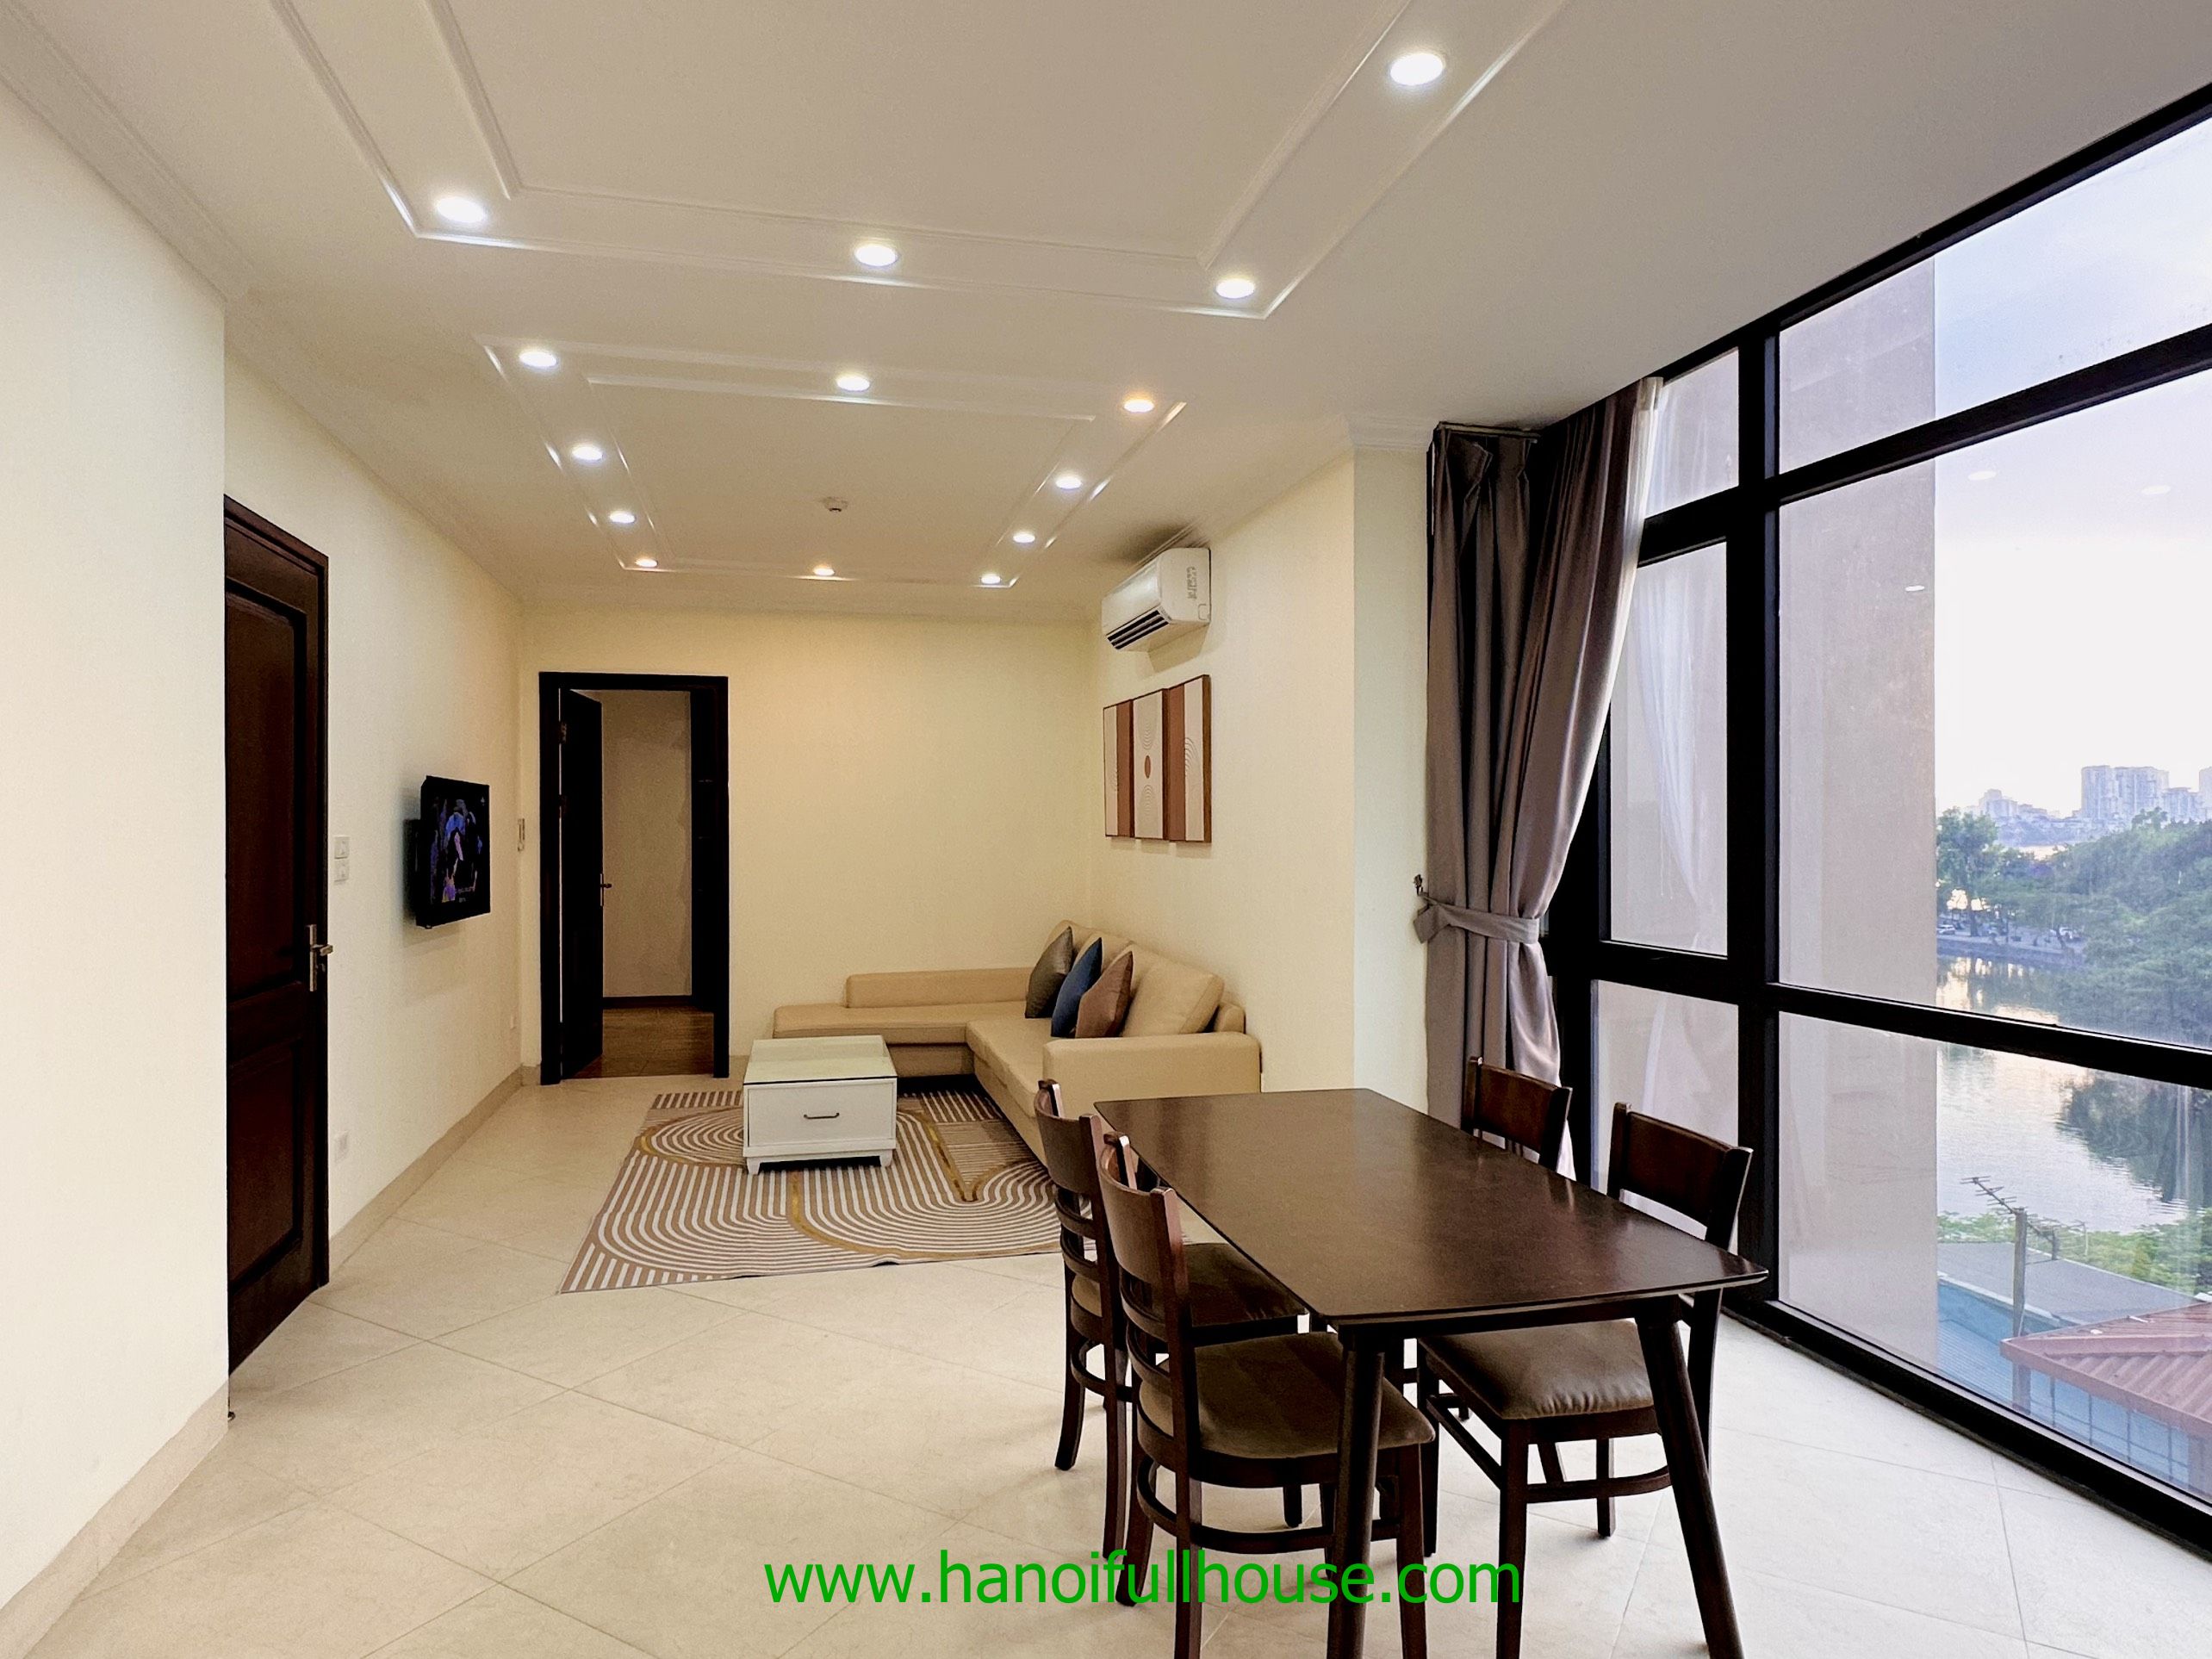 Spacious apartment with 2 bedrooms, 2 bathrooms for rent